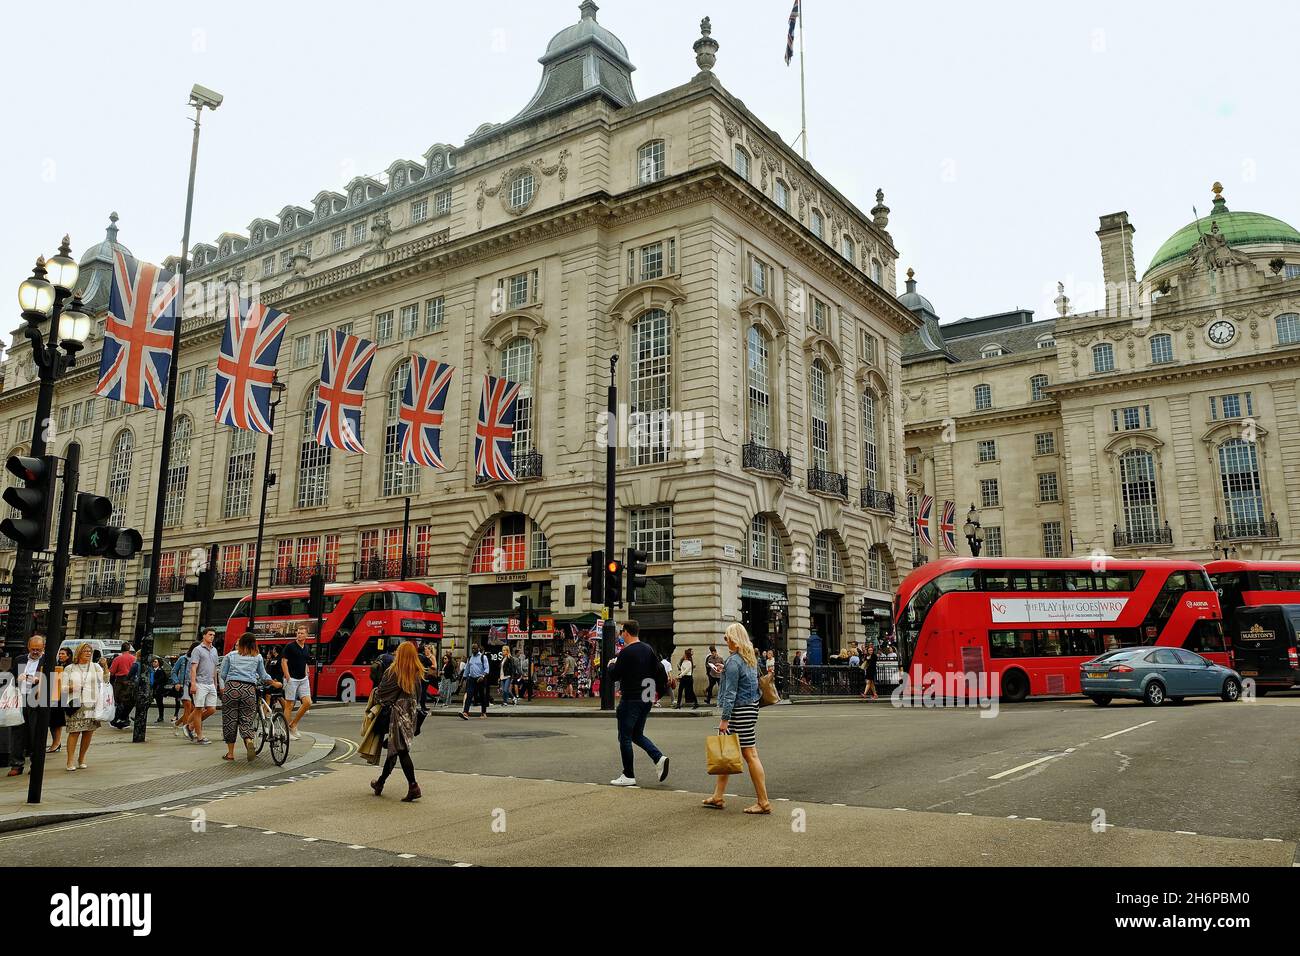 London, United Kingdom - May 21, 2018 : A day in life at Piccadilly Circus in London Stock Photo